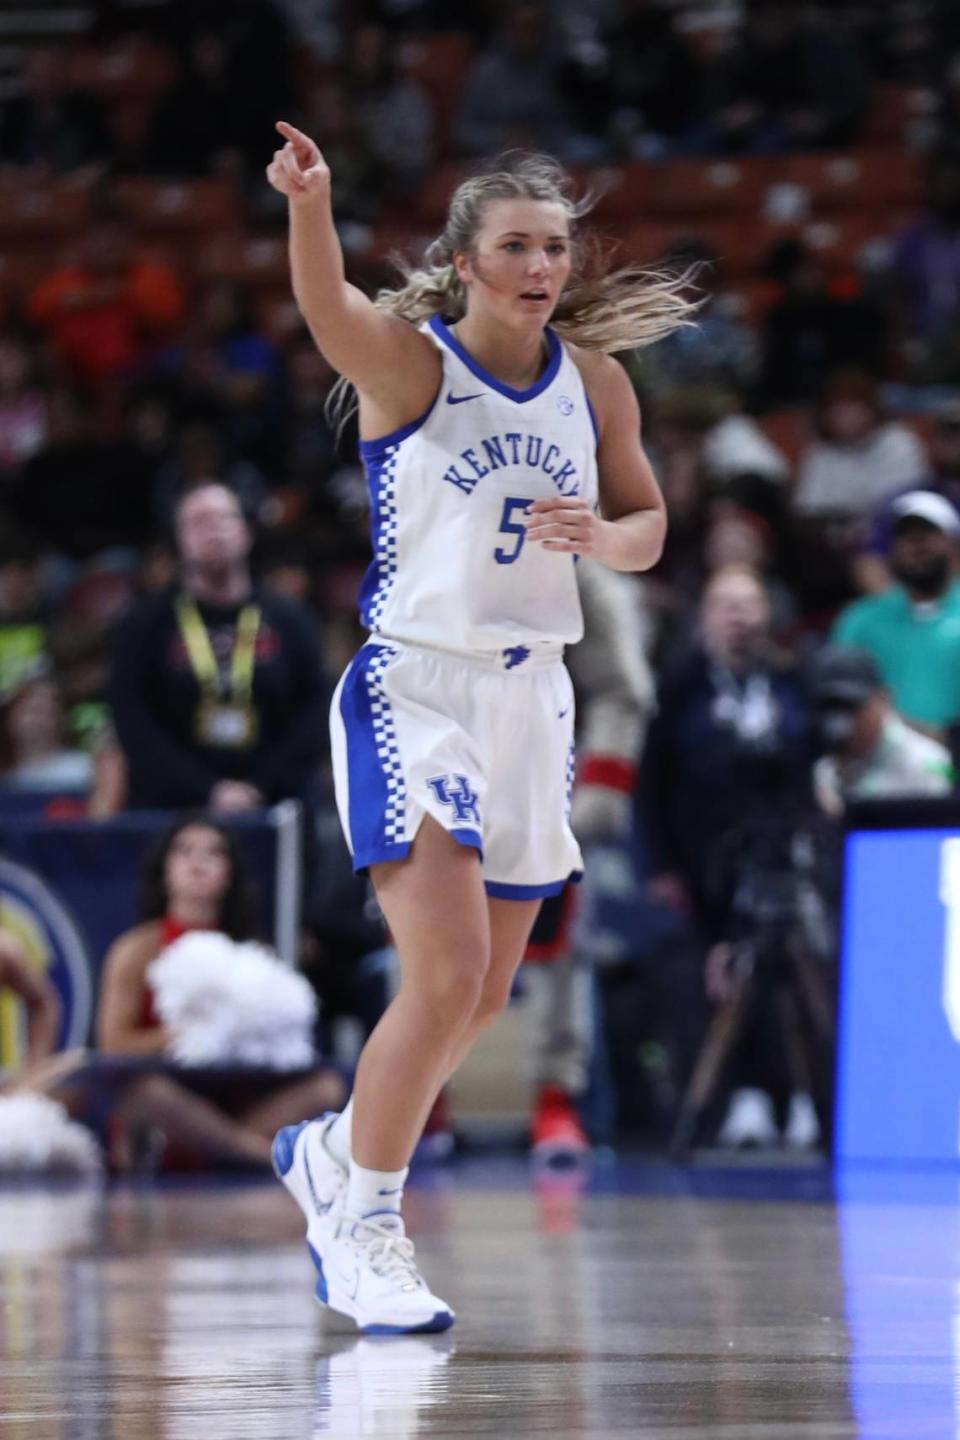 Cassidy Rowe started for Kentucky on Wednesday along with Brooklynn Miles, Ajae Petty, Amiya Jenkins and Emma King. The Wildcats played without regular starter Maddie Scherr who is in concussion protocol.